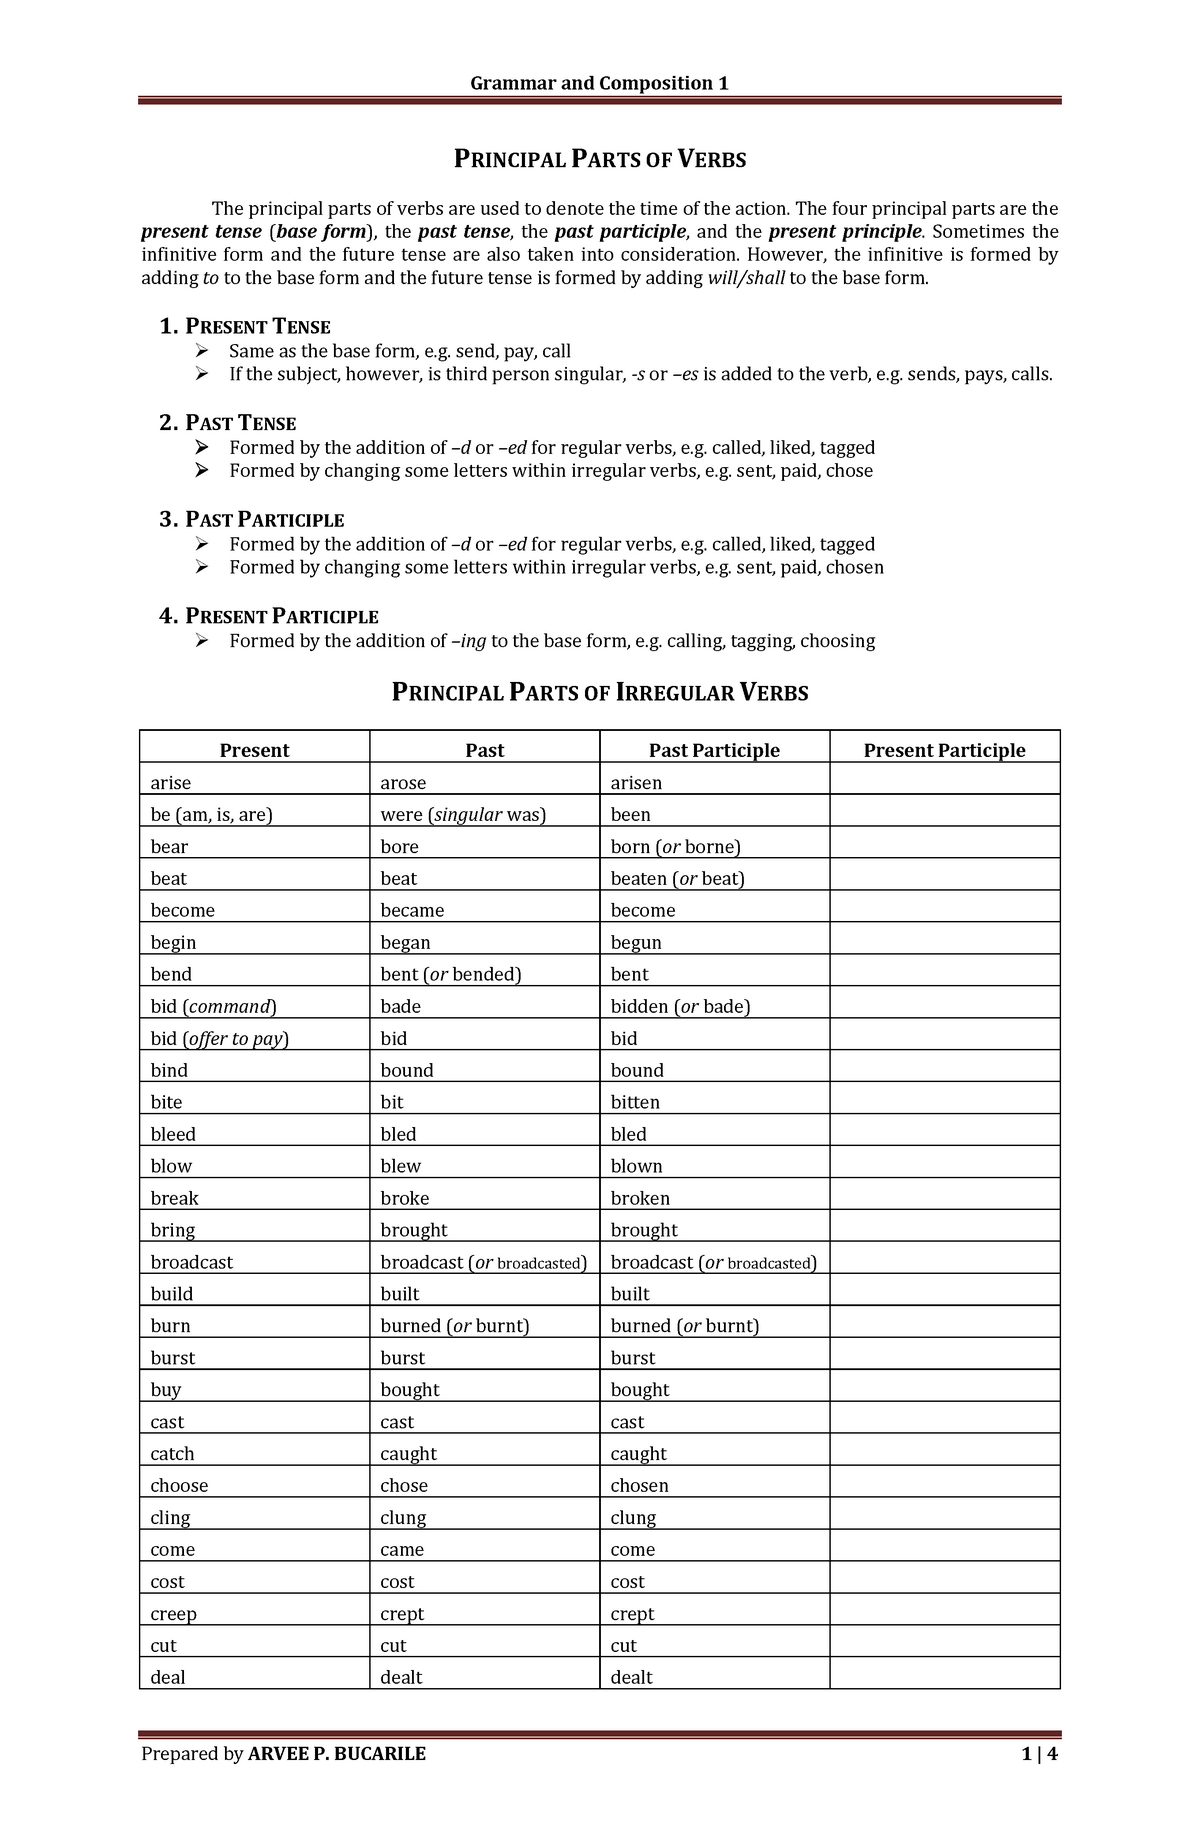 ppt-the-principal-parts-of-verbs-powerpoint-presentation-free